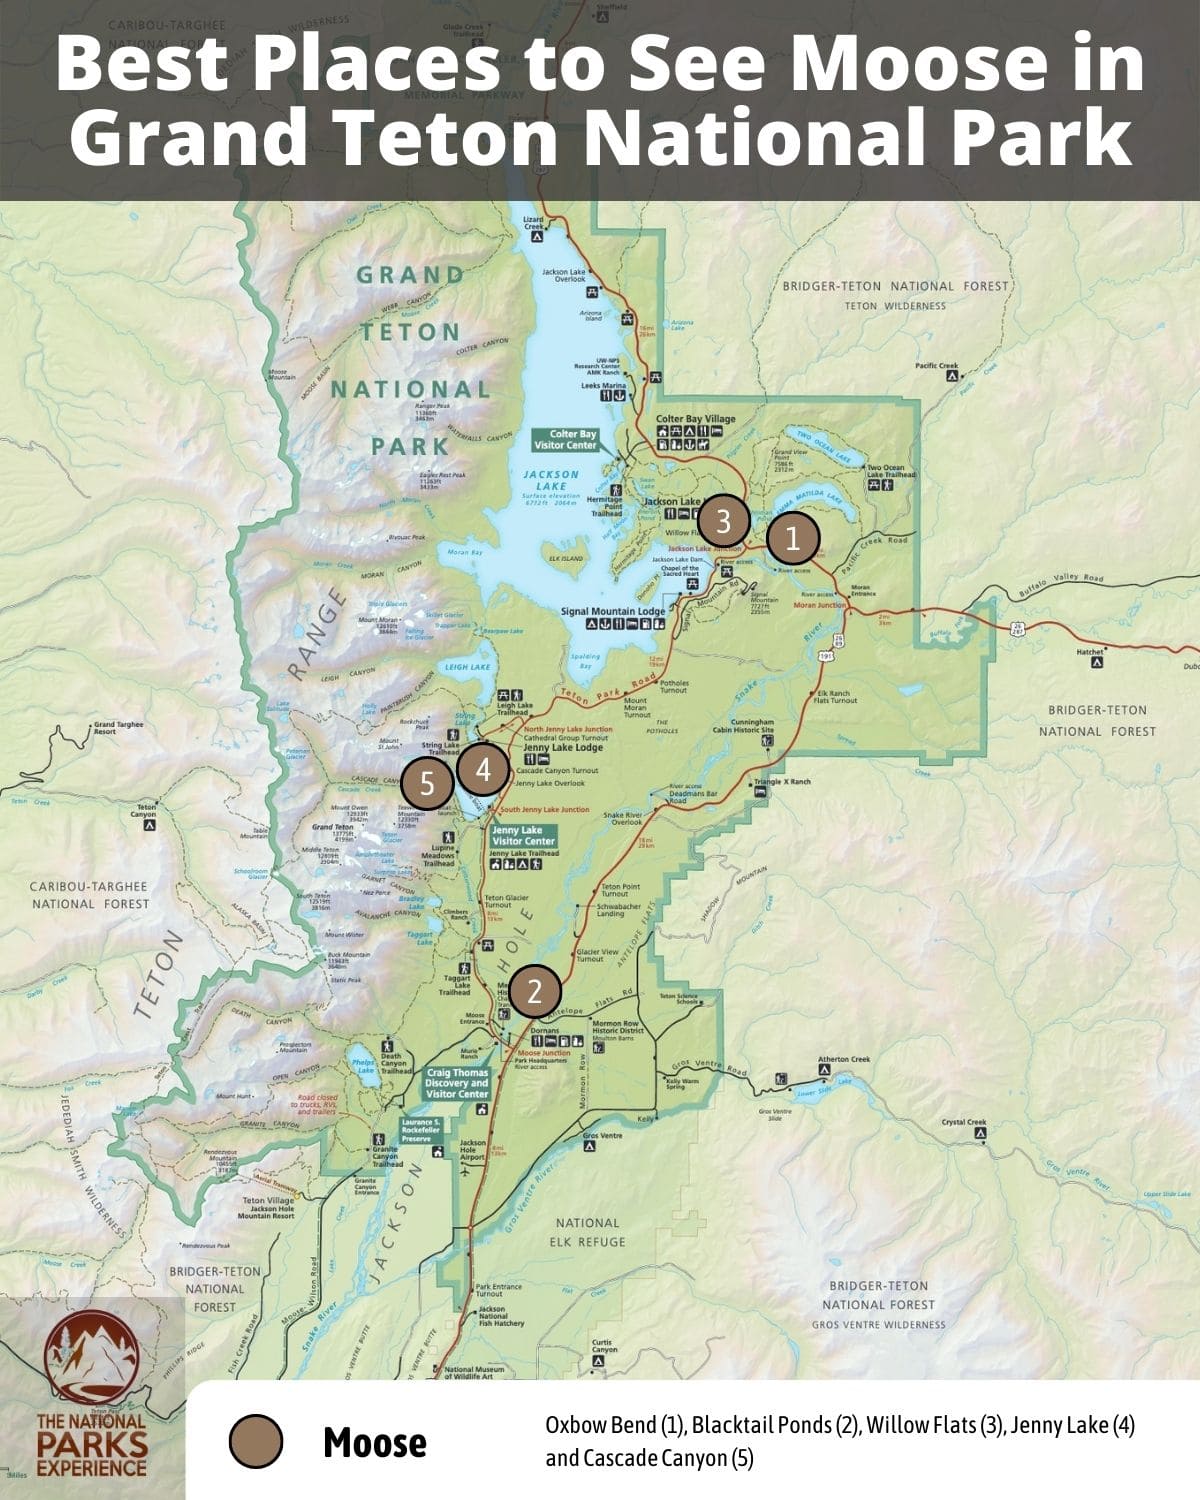 Map of the Best Places to See Moose in Grand Teton National Park